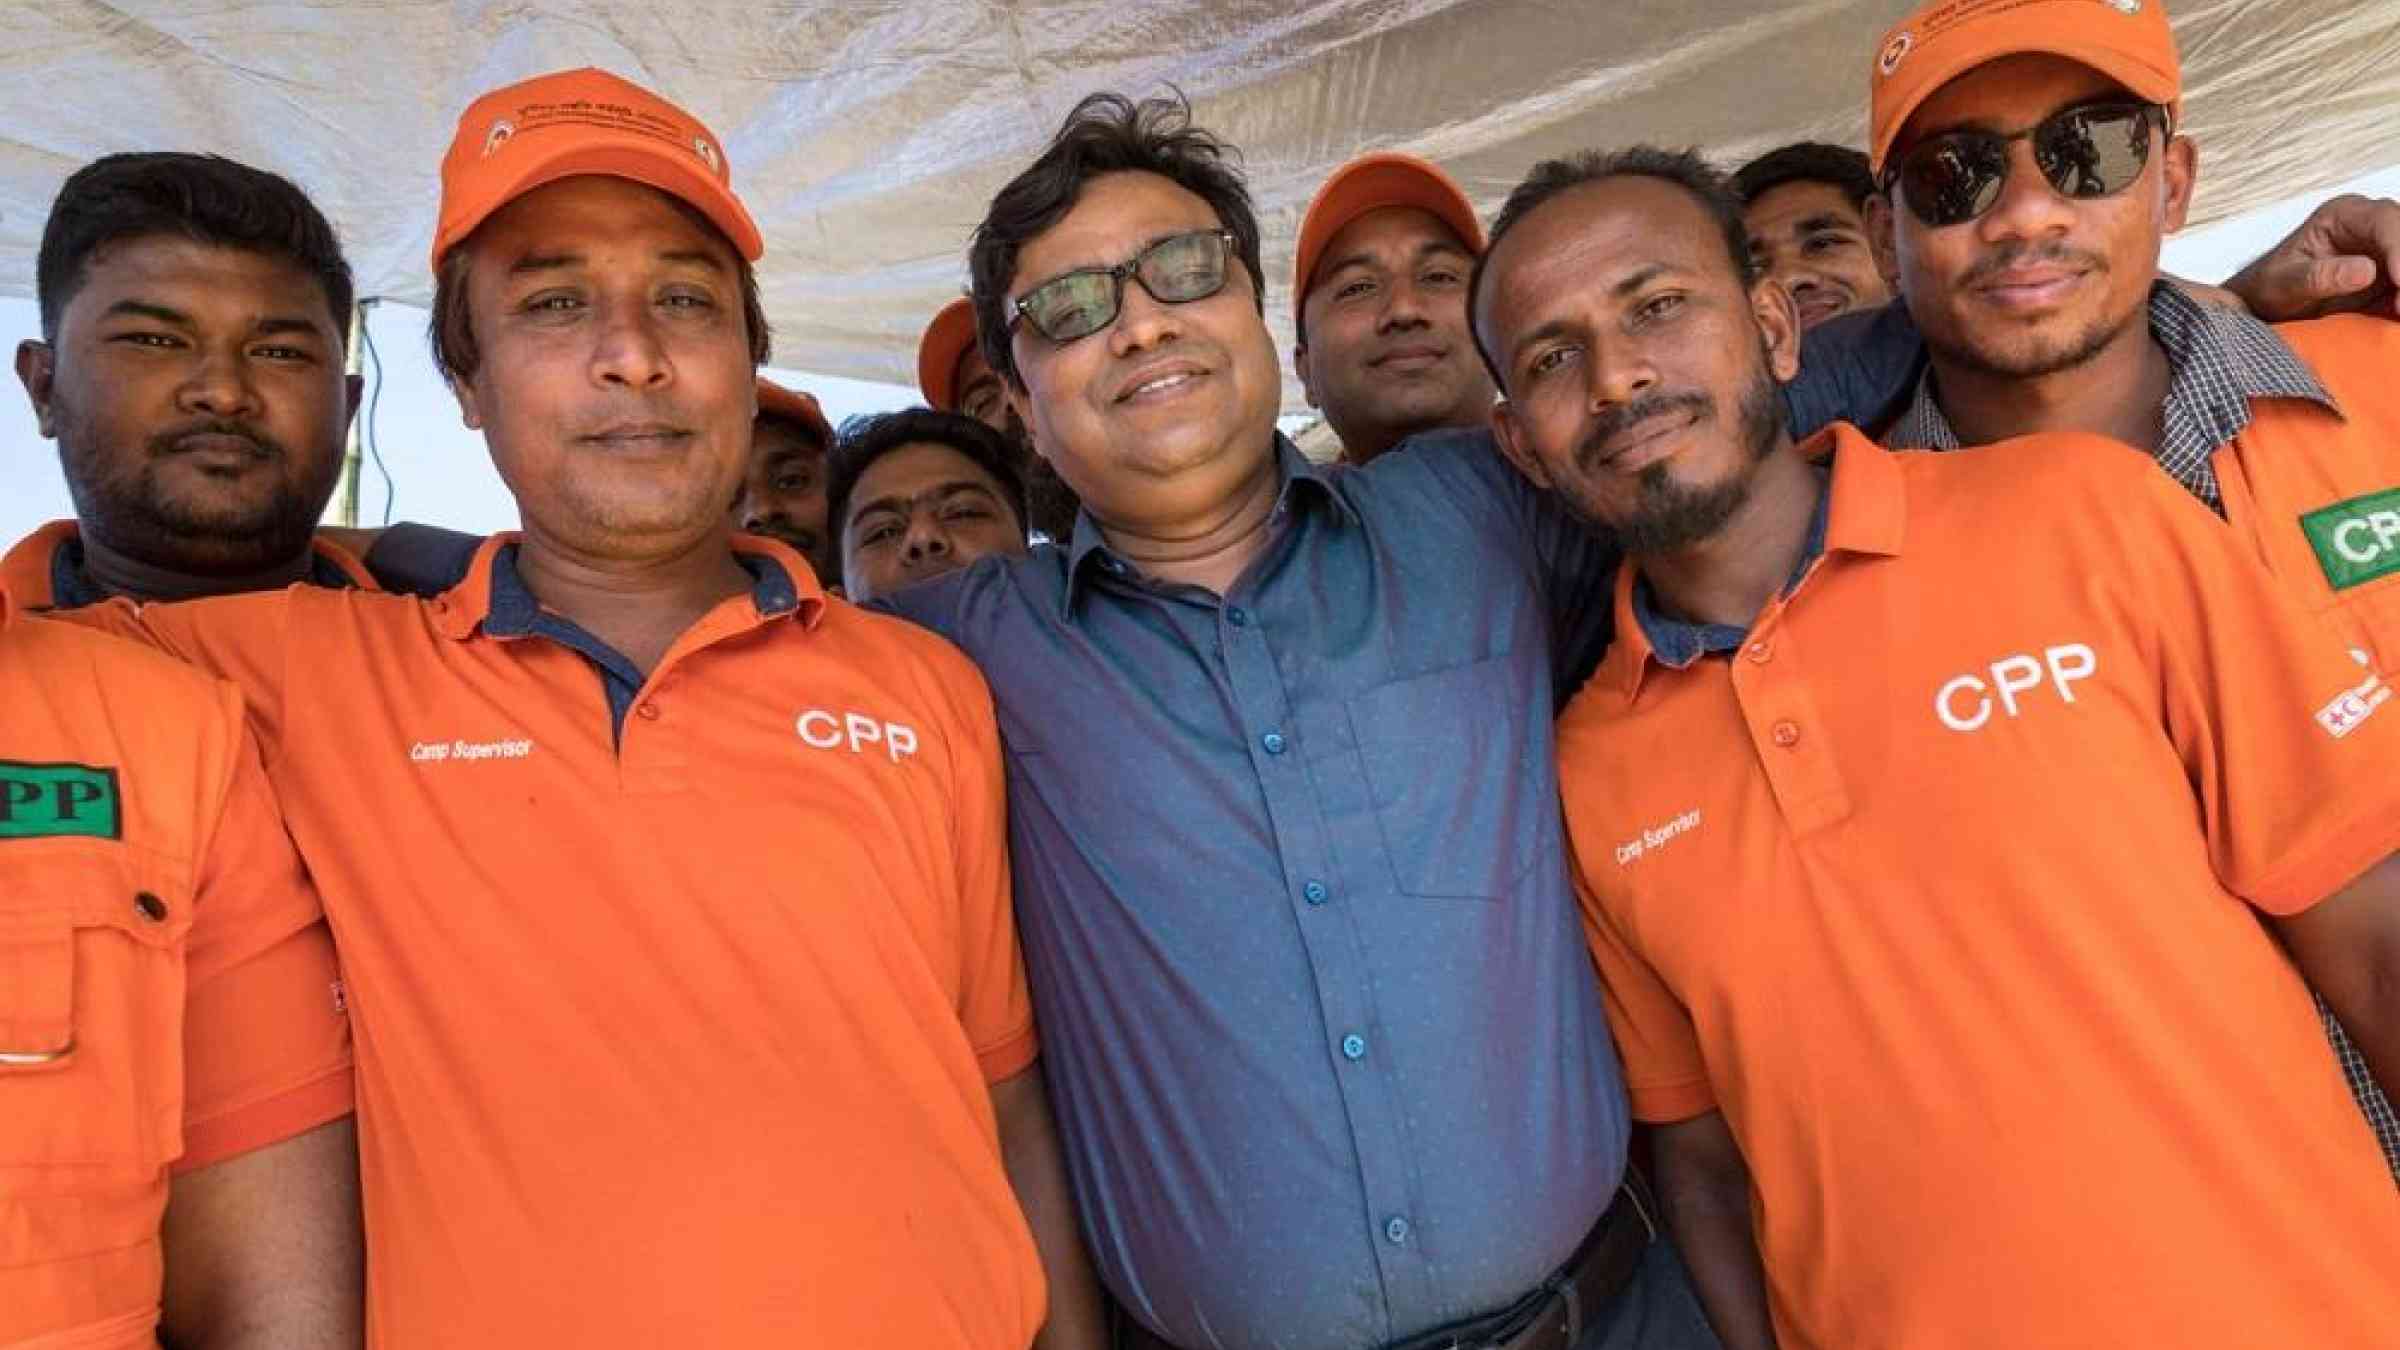 Bangladesh government Cyclone Preparedness Programme Director, Ahmadul Haque, sharing a light-hearted moment with volunteers in Cox's Bazar